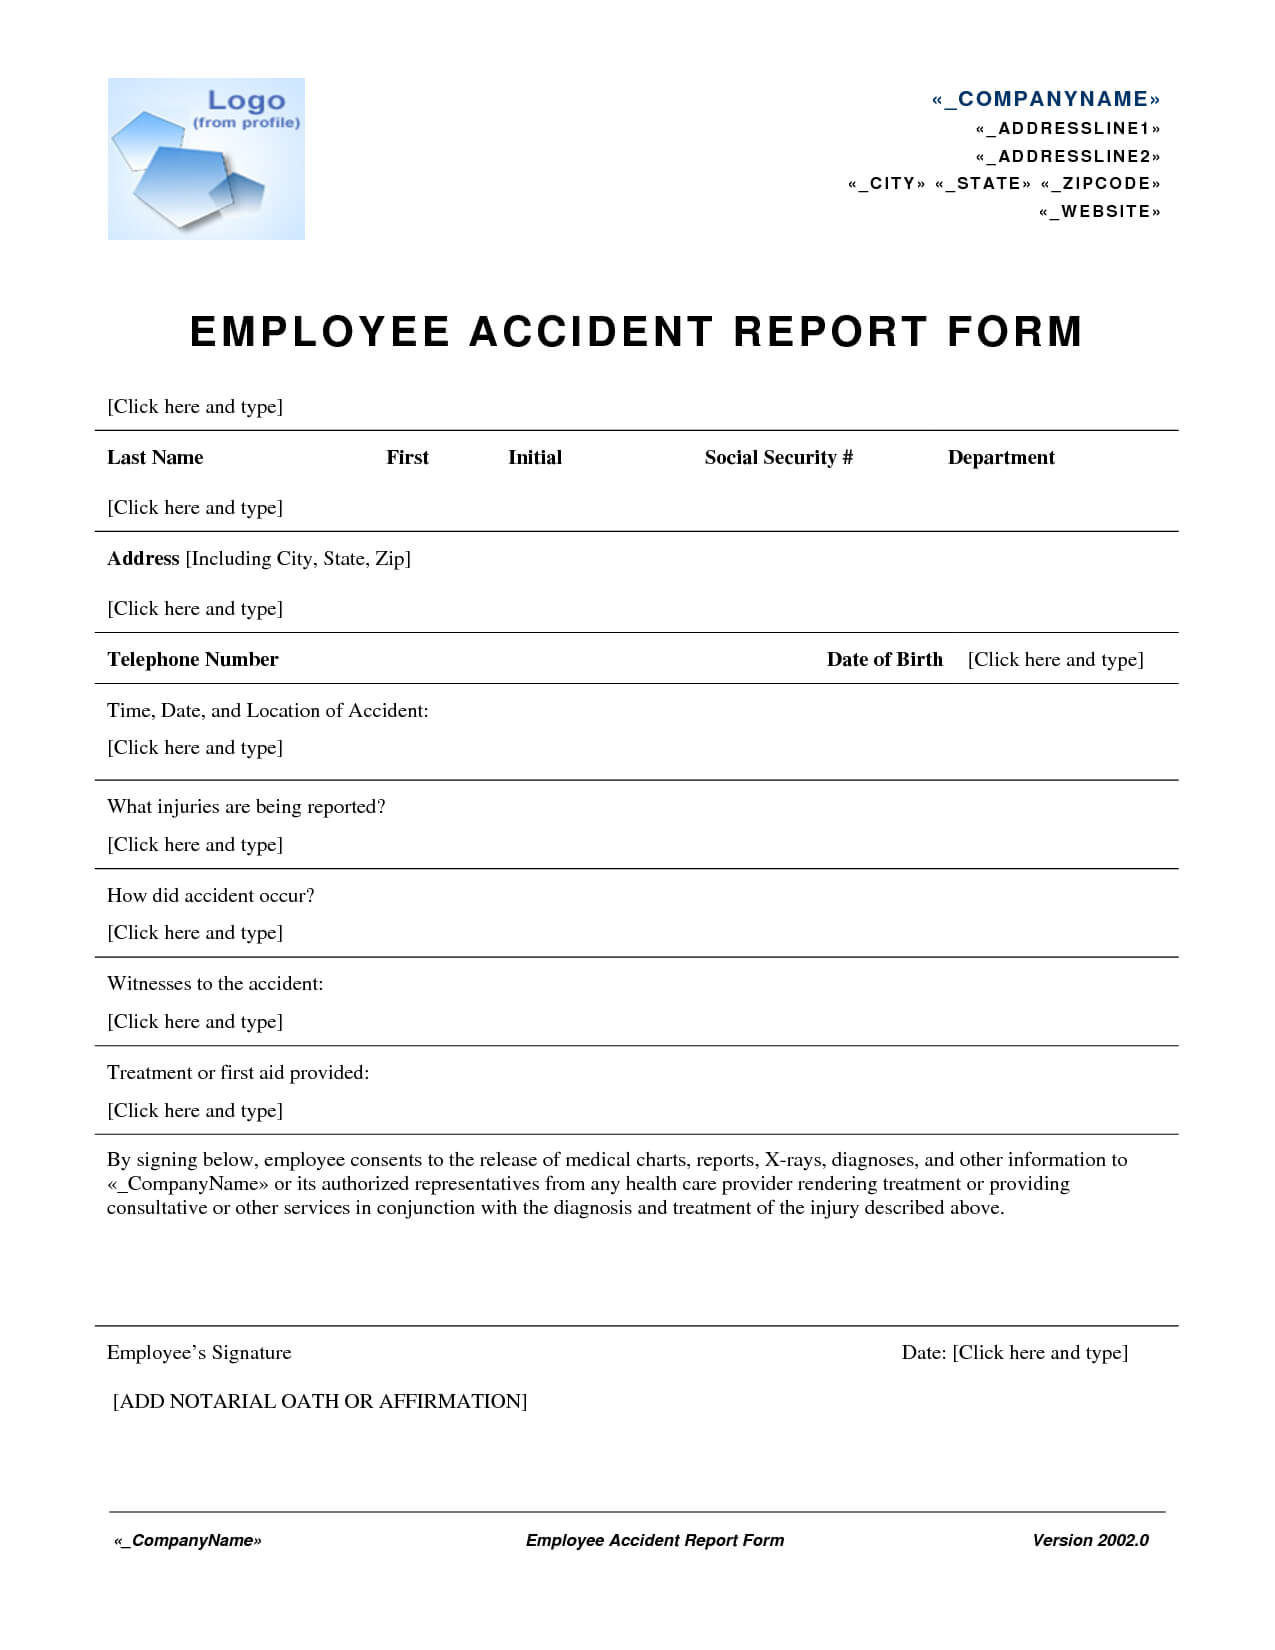 Incident Report Form Workplace Health And Safety Sample Within Health And Safety Incident Report Form Template